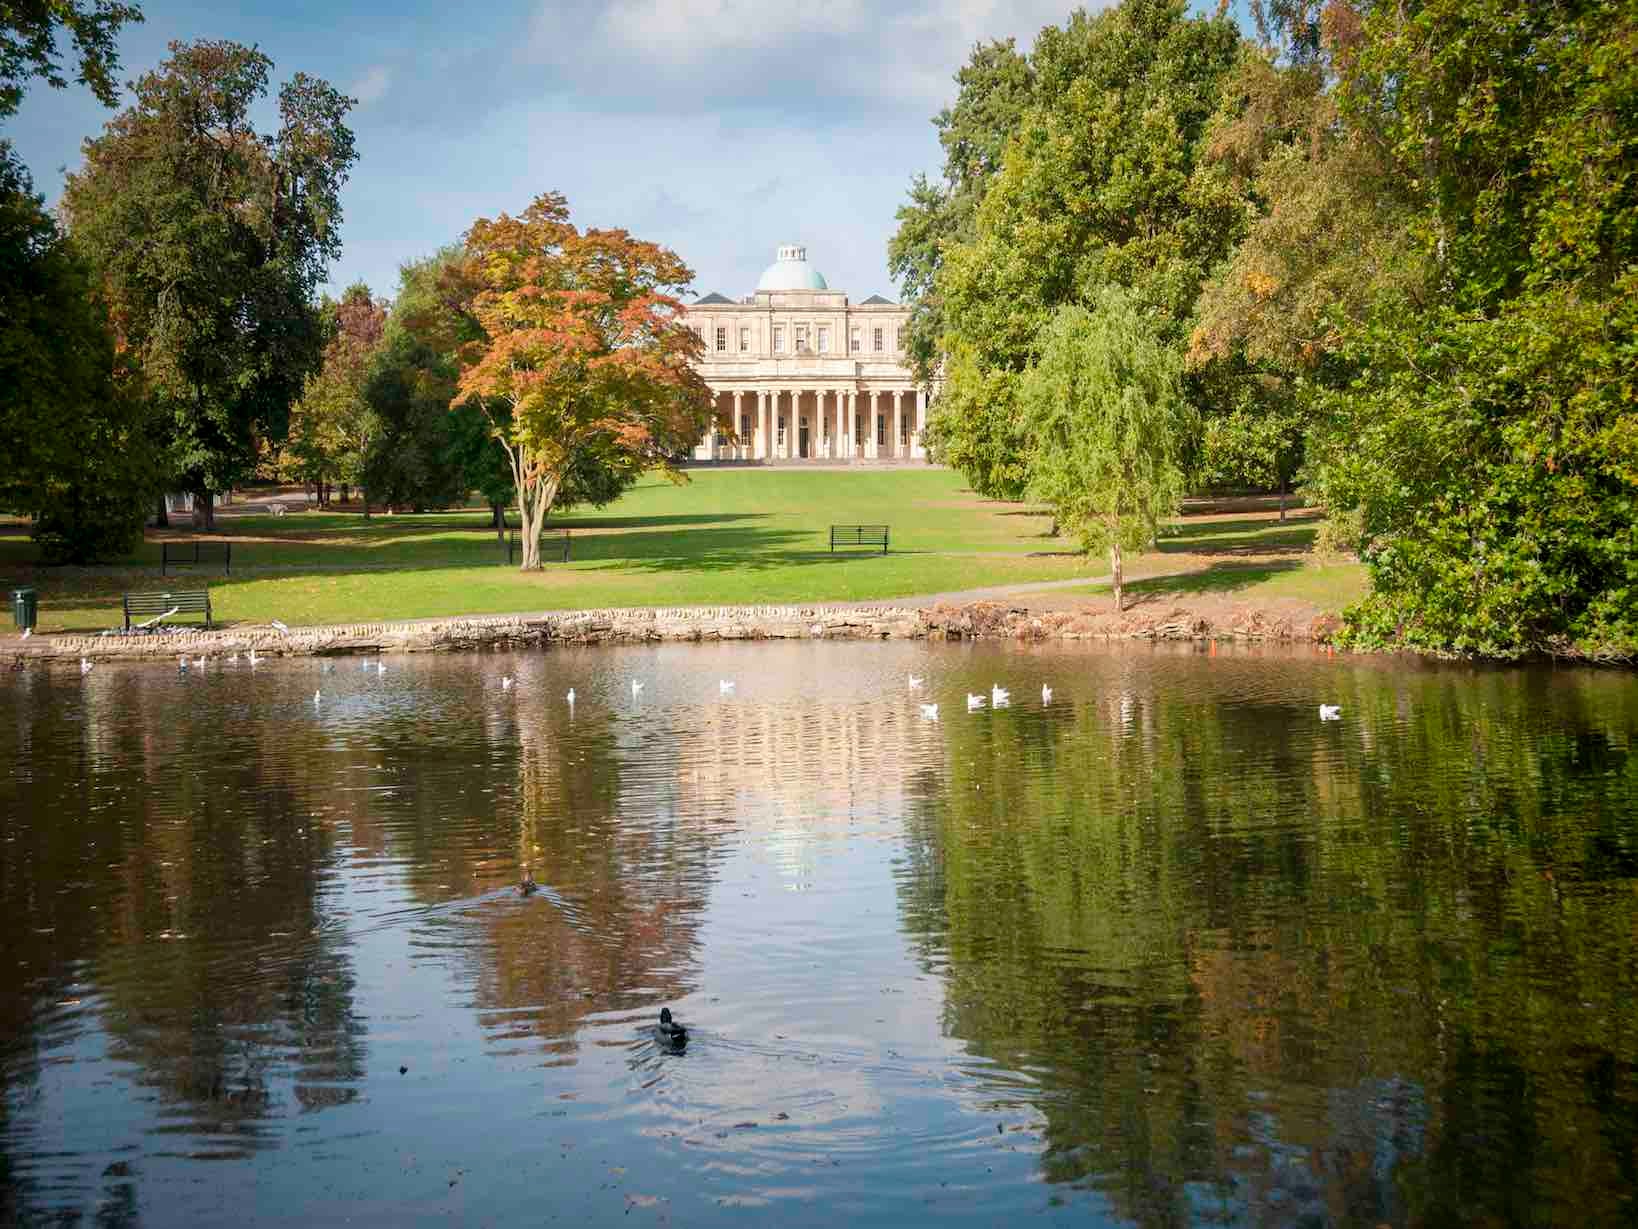 Pay a visit to the Pittville Pump Rooms in historic Cheltenham